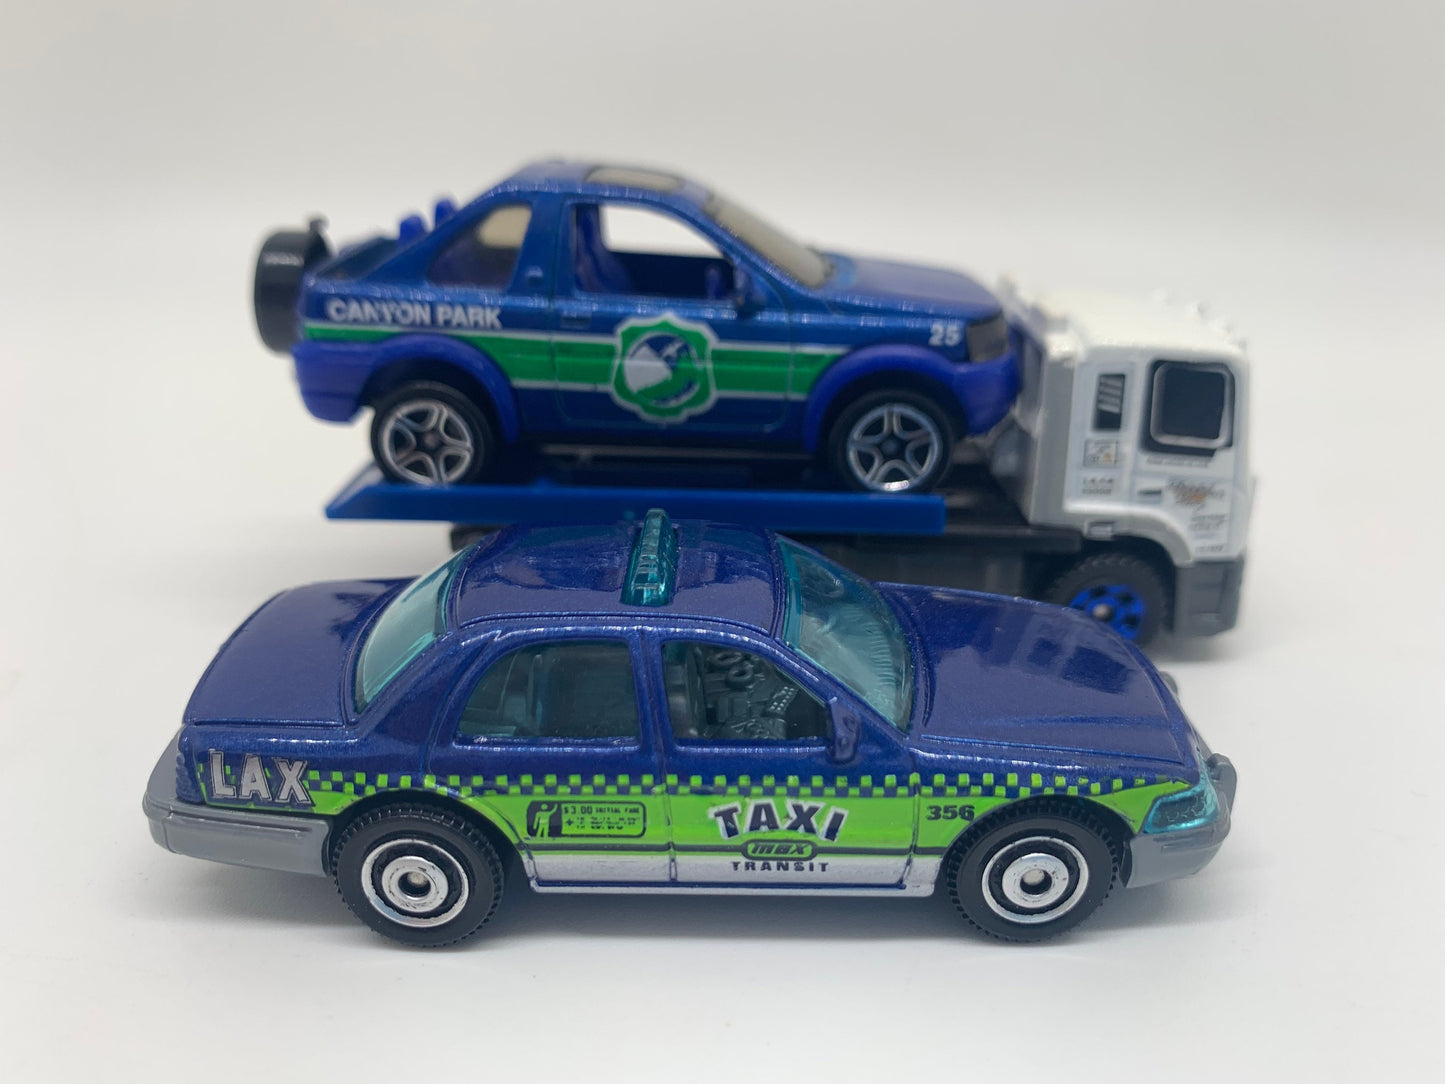 Matchbox Ford Crown Victoria Taxi Land Rover Freelander Blue Collectable Miniature Scale Model Toy Car Perfect Birthday Gift